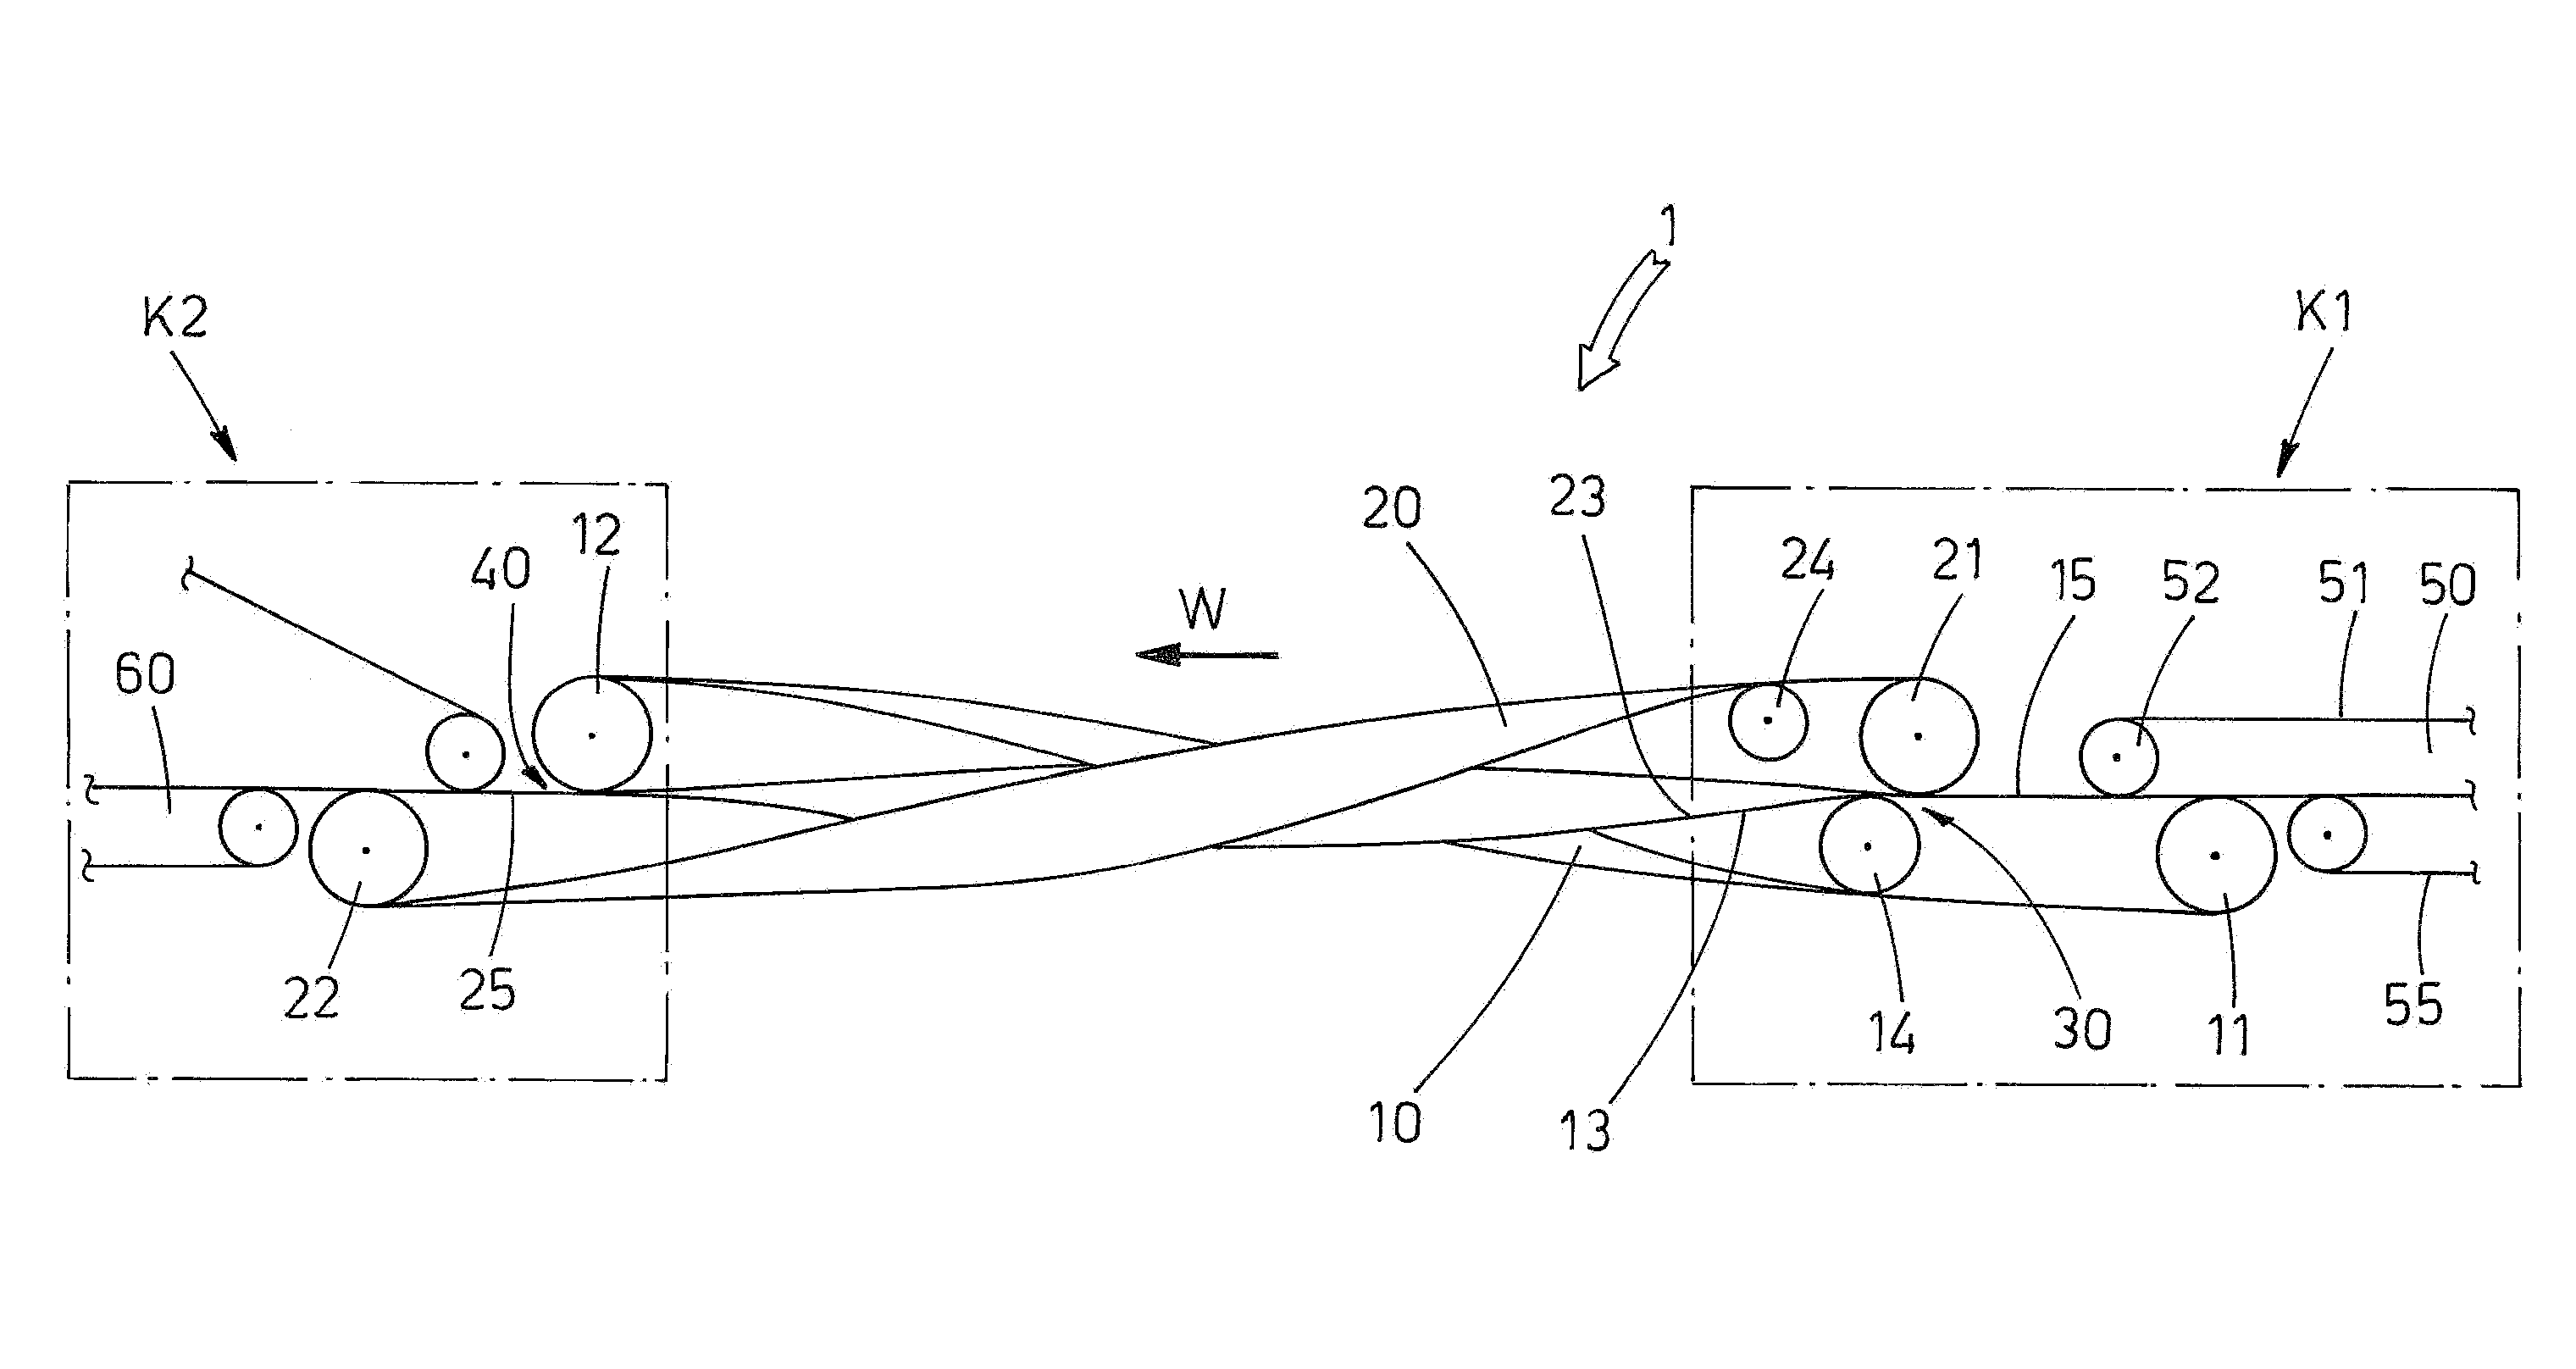 Conveyor for transporting and overturning flat objects, such as sheaves of paper or printed materials